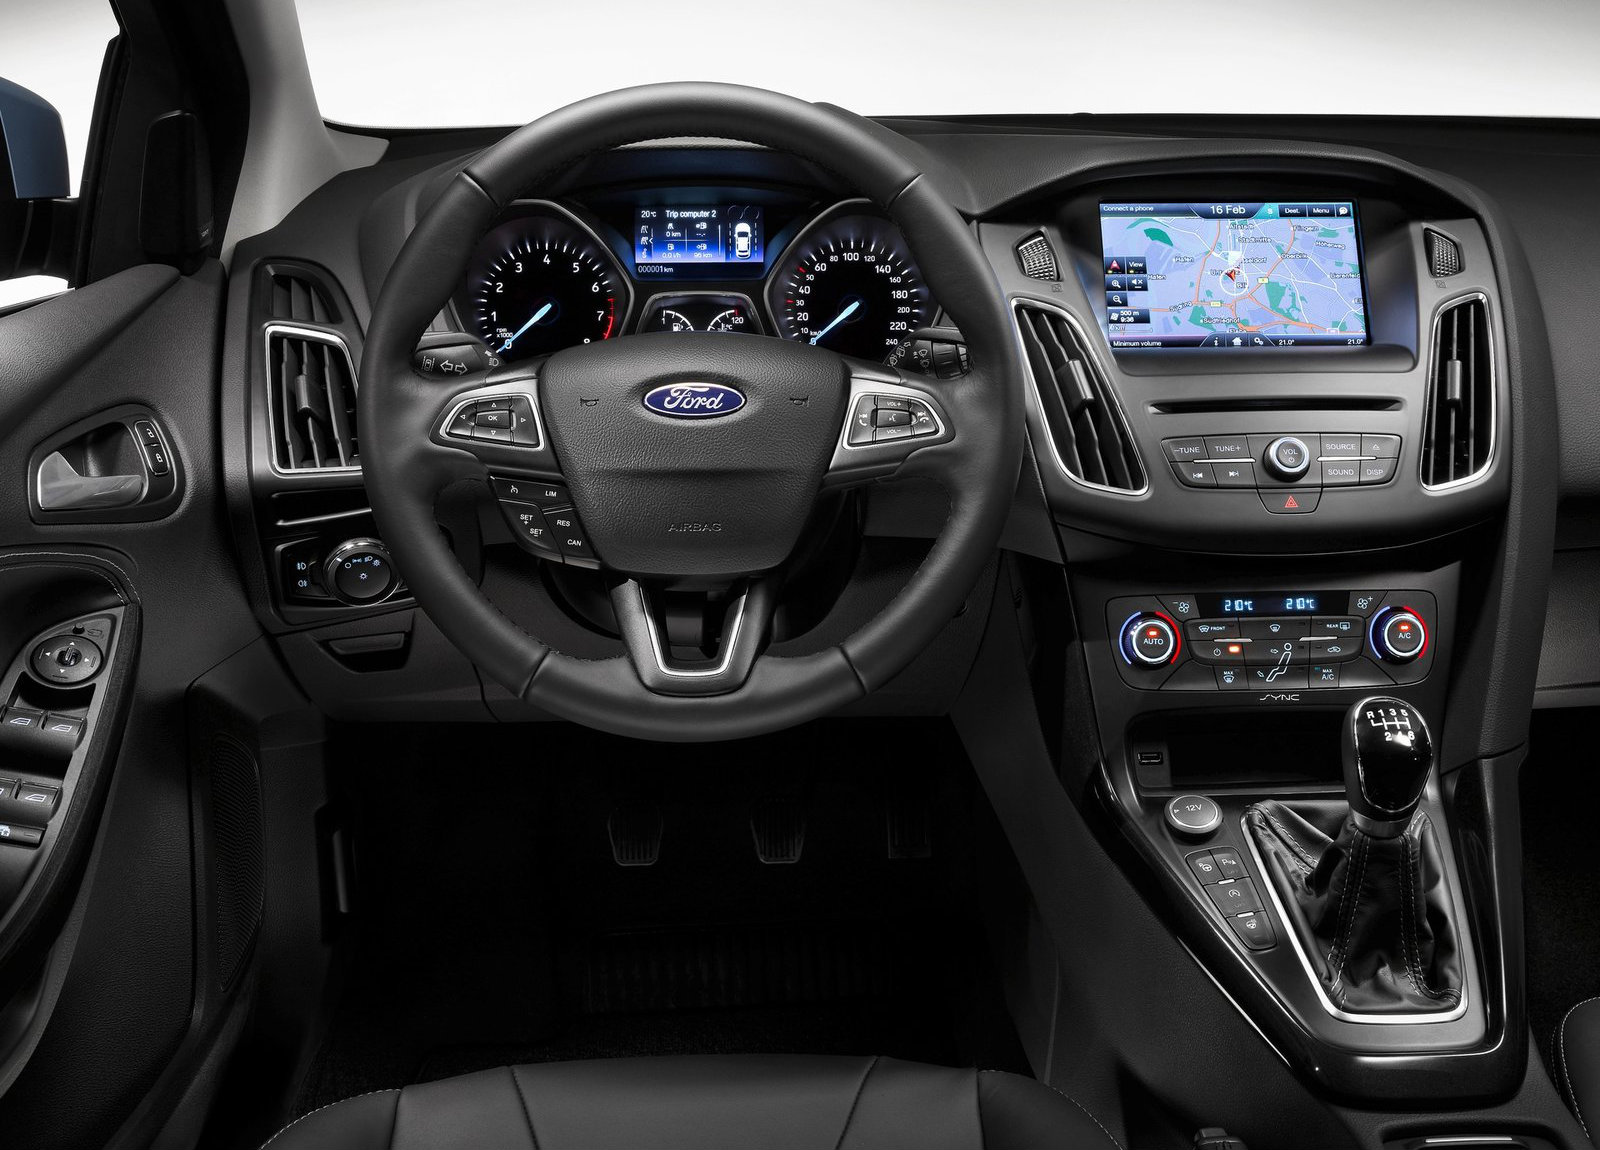 2015 Ford Focus Pricing For Europe Starts From 18 750